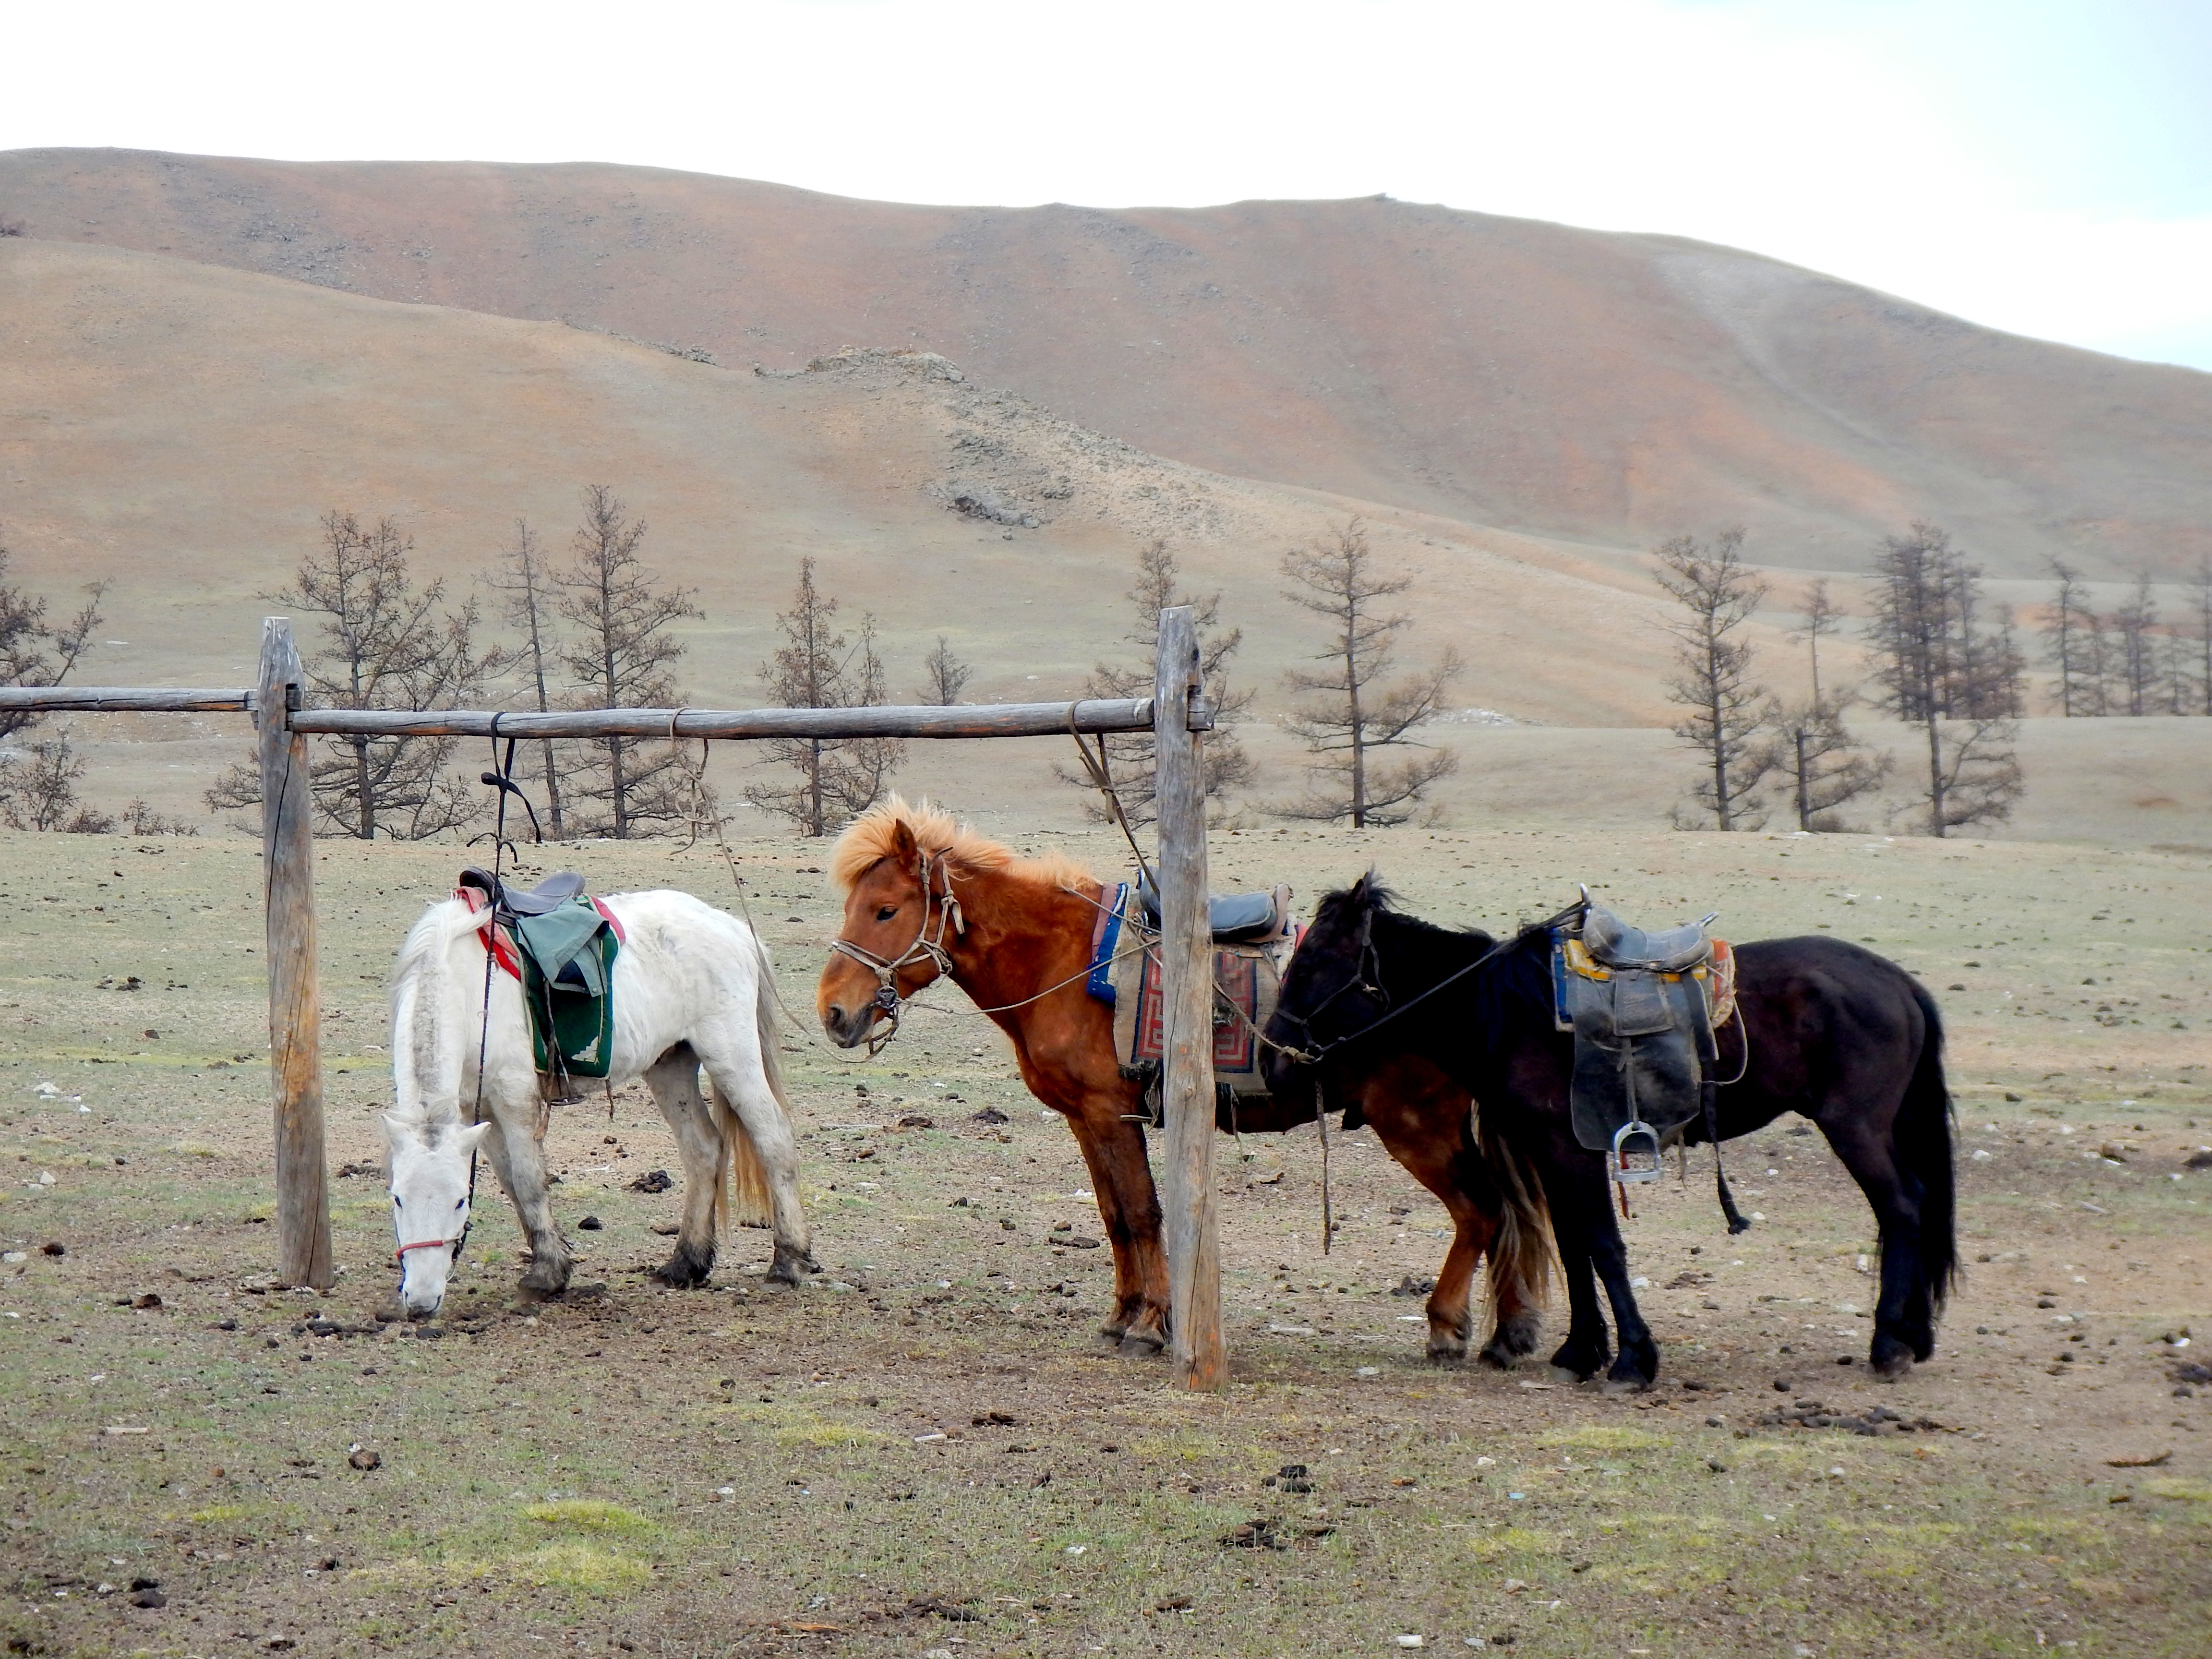 Our hearty Mongolian horses, who put up with us for days. Northern Mongolia.